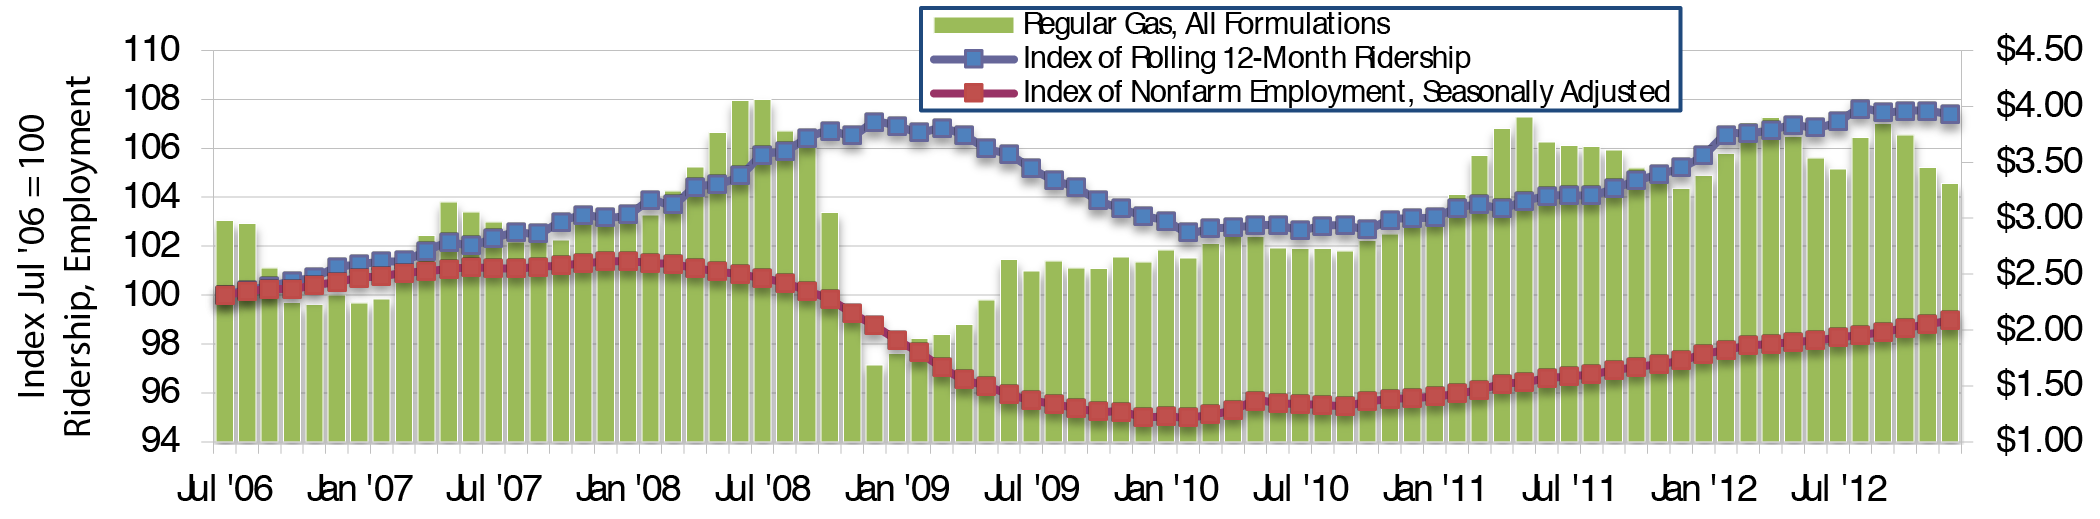 Combination bar chart and line chart shows values for price per gallon of regular gas and indexed values for ridership and nonfarm employment for the period from July 2006 through December 2012. The plot for price of regular gas, all formations, has an initial value of $2.98 in July 2006, with the trend downward to a value of $2.23 in November 2006, upward to a value of $3.15 in May 2007 followed by a slight downward trend for 6 months before climbing to a value of $4.06 in July 2008. The trend shows a sharp drop to a low value of $1.69 in December 2008, followed by a general upward trend reaching a value of $3.91 in May 2011 followed by a downward trend to a value of $3.27 in December 2011. In 2012, values oscillate with peaks at $3.85 in March 2012 and $3.72 in August 2012, ending at $3.31 in December 2012. The index of nonfarm employment, seasonally adjusted, swings slightly above 100 through September 2008, swings downward to a value of 95 in April 2010, then trends upward to end at a value just above 99 in December 2012. The index of rolling 12-month ridership increases from an initial value of 100 in July 2006 to a value of 107 for the beginning of 2009, trends downward to a value of 103 through the summer months of 2010, and swings upward to end at about 107 in August to December 2012. Source: National Transit Database, U.S. Energy Information Administration's Gas Pump Data History, and Bureau of Labor Statistics' Employment Data.